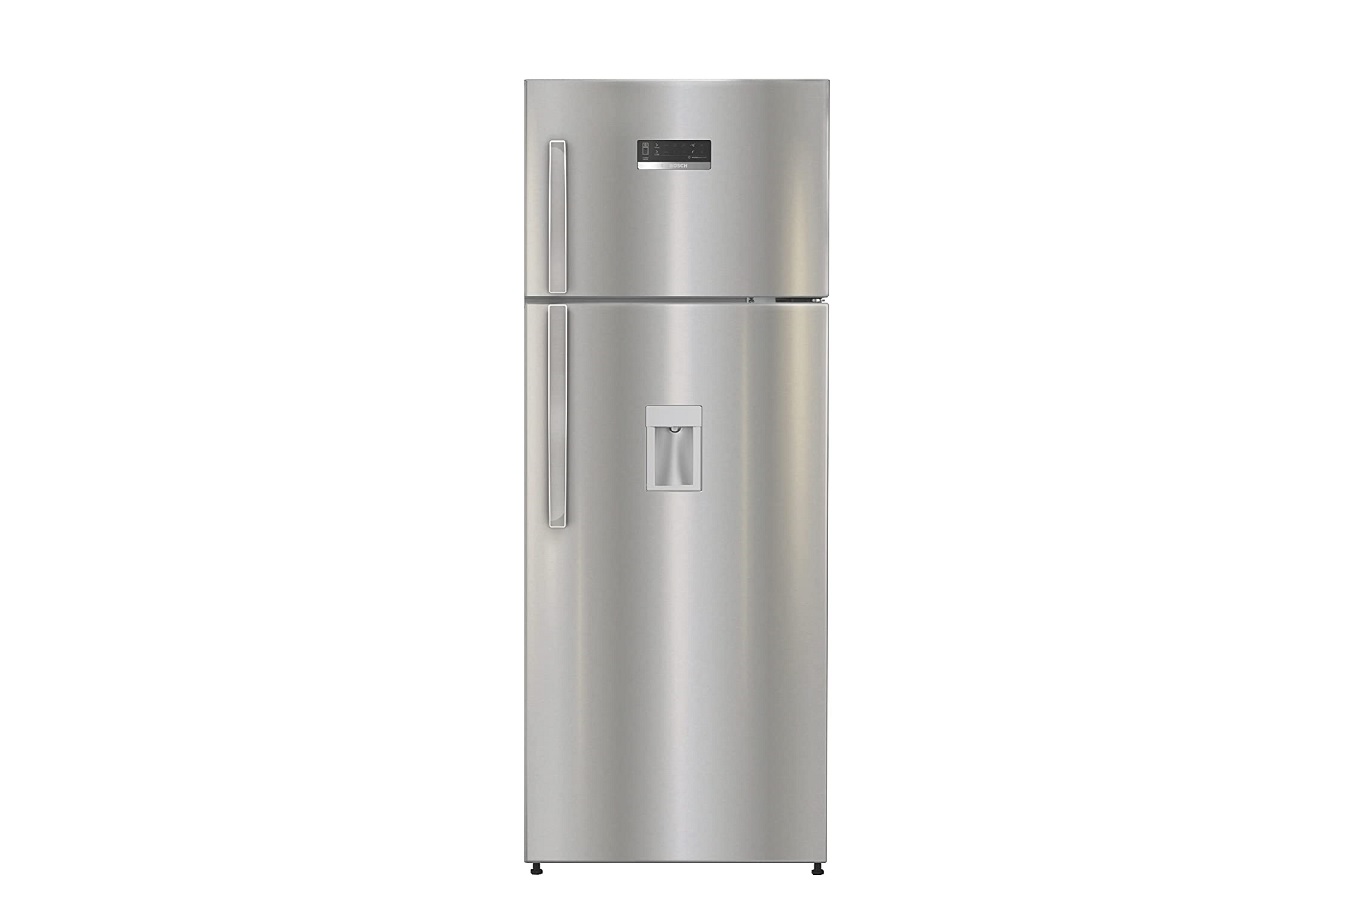 BOSCH CTC35S03DI (358 LTR) MAX CONVERT INVERTER FROST FREE REFRIGERATOR WITH WATER DISPENSER, CONVER